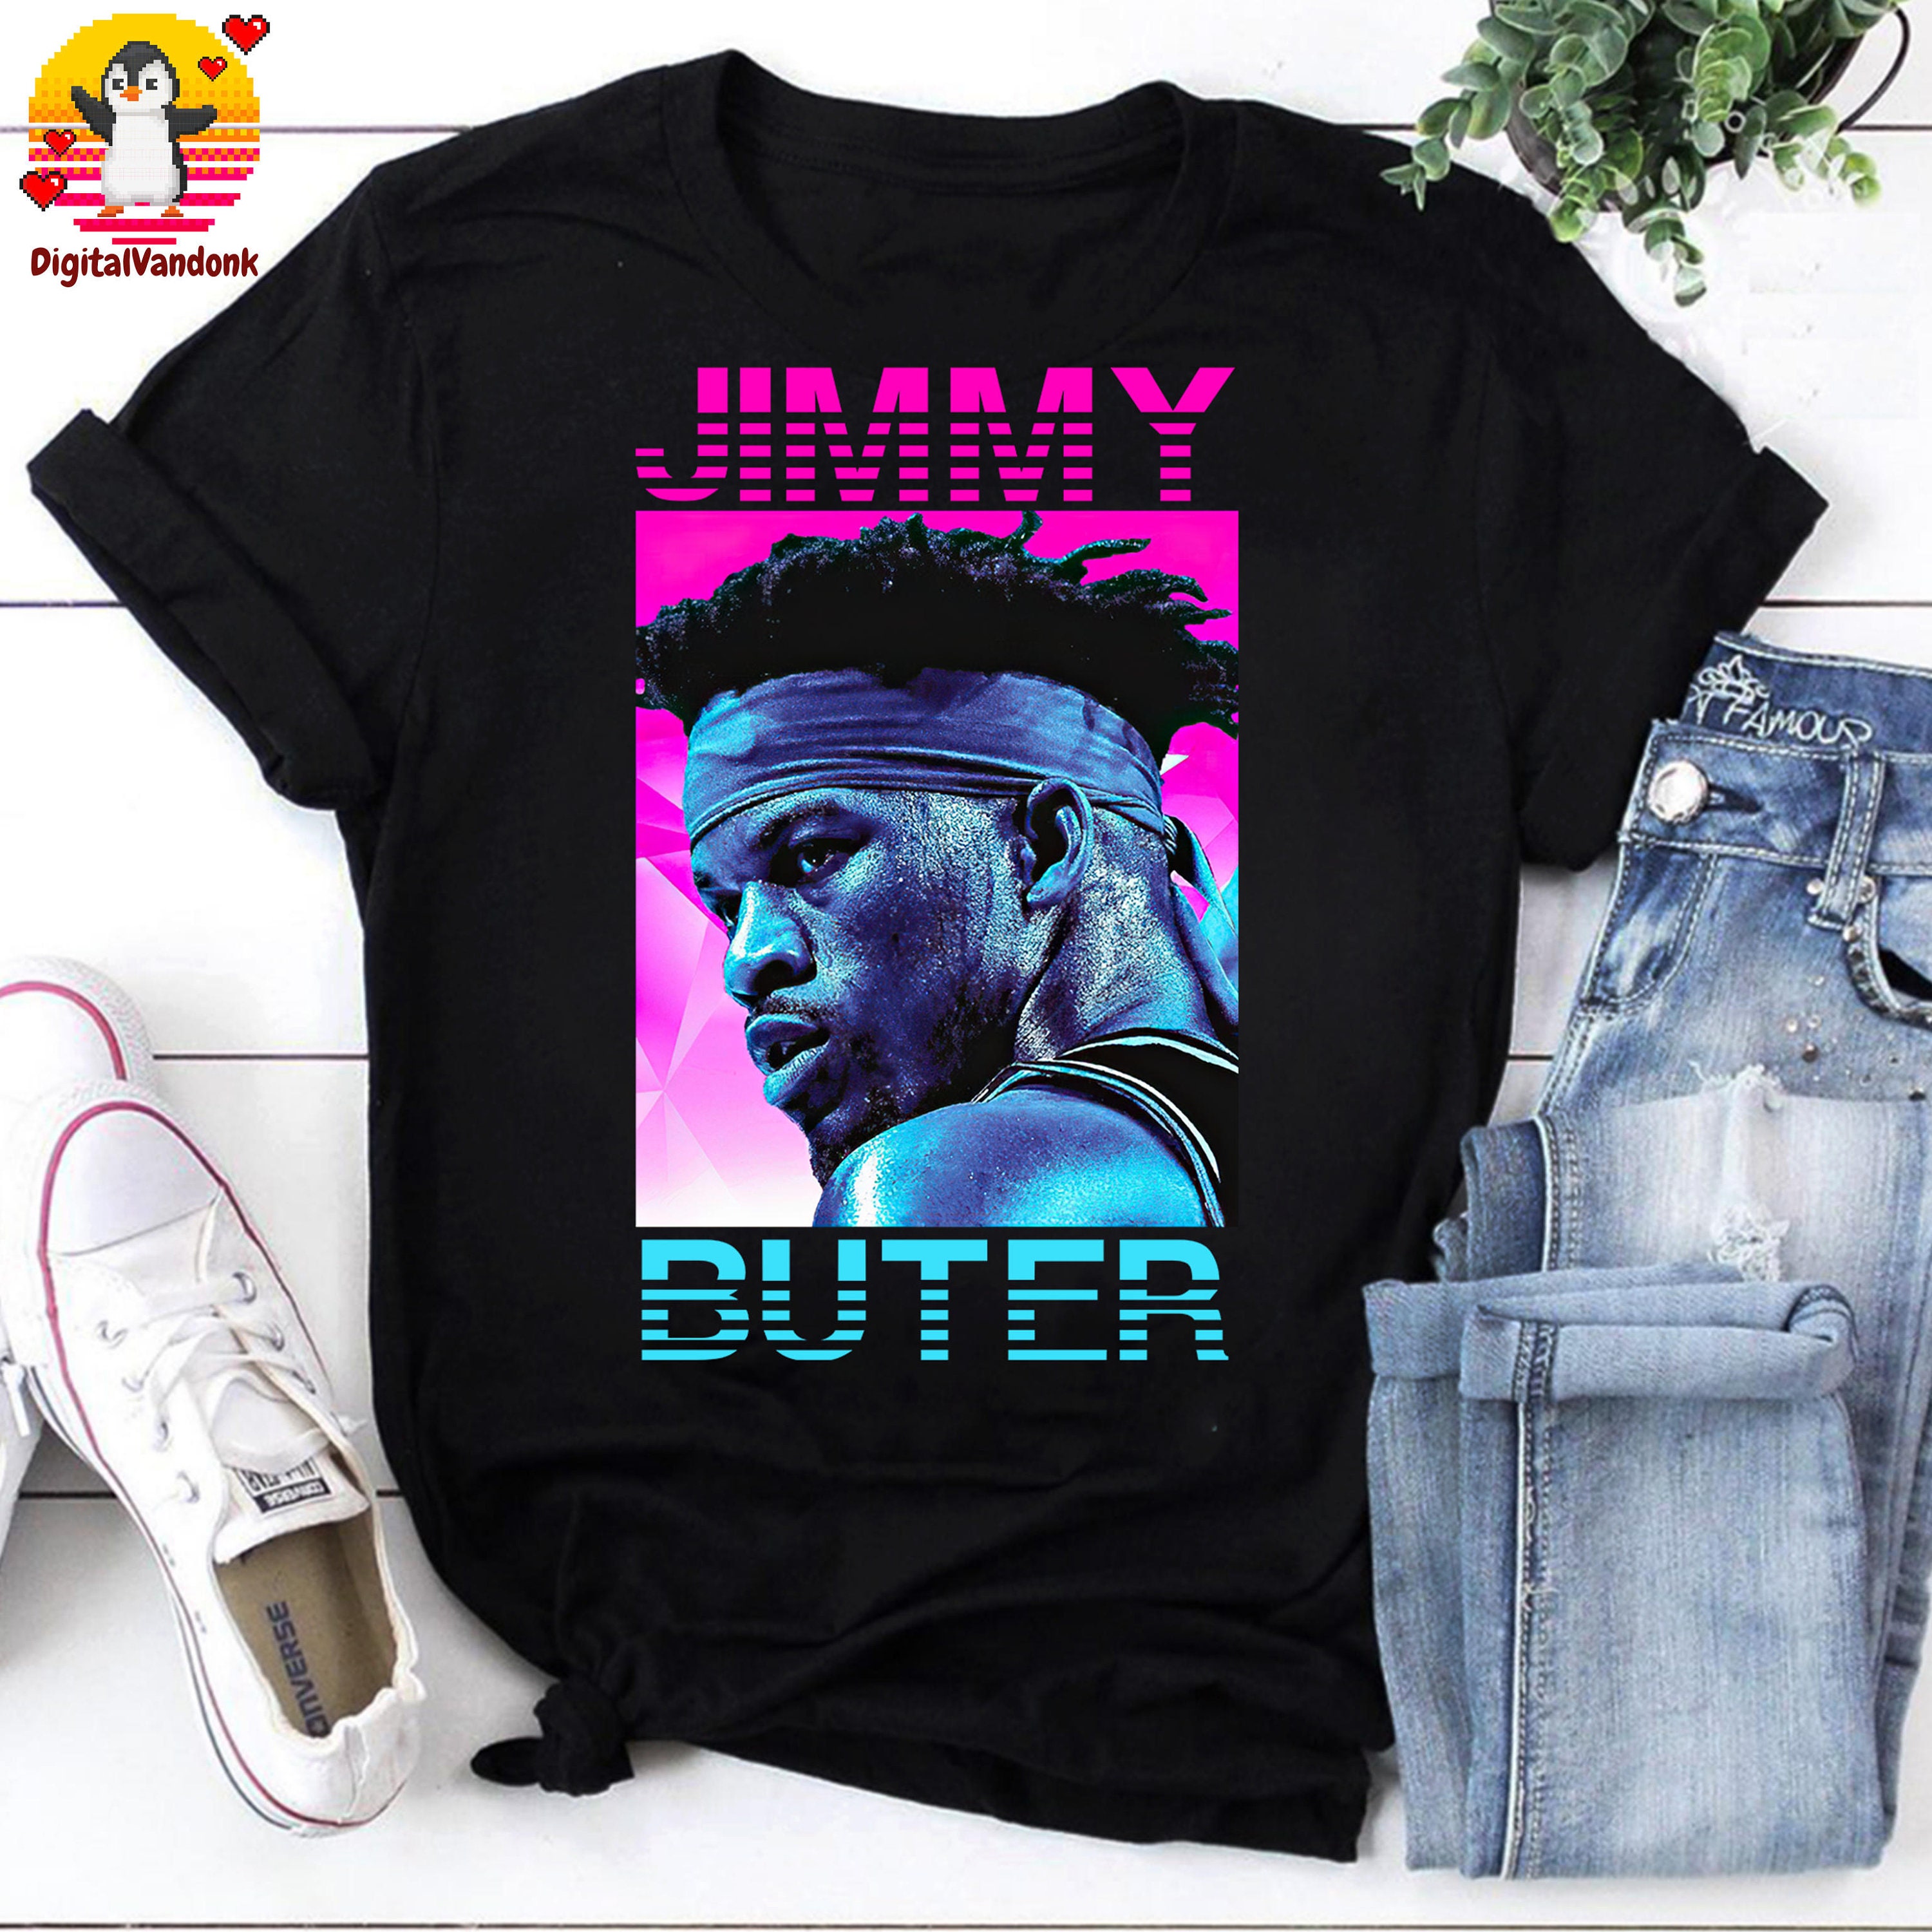 Jimmy Butler Shirt, Basketball shirt, Classic 90s Graphic Tee - Bring Your  Ideas, Thoughts And Imaginations Into Reality Today